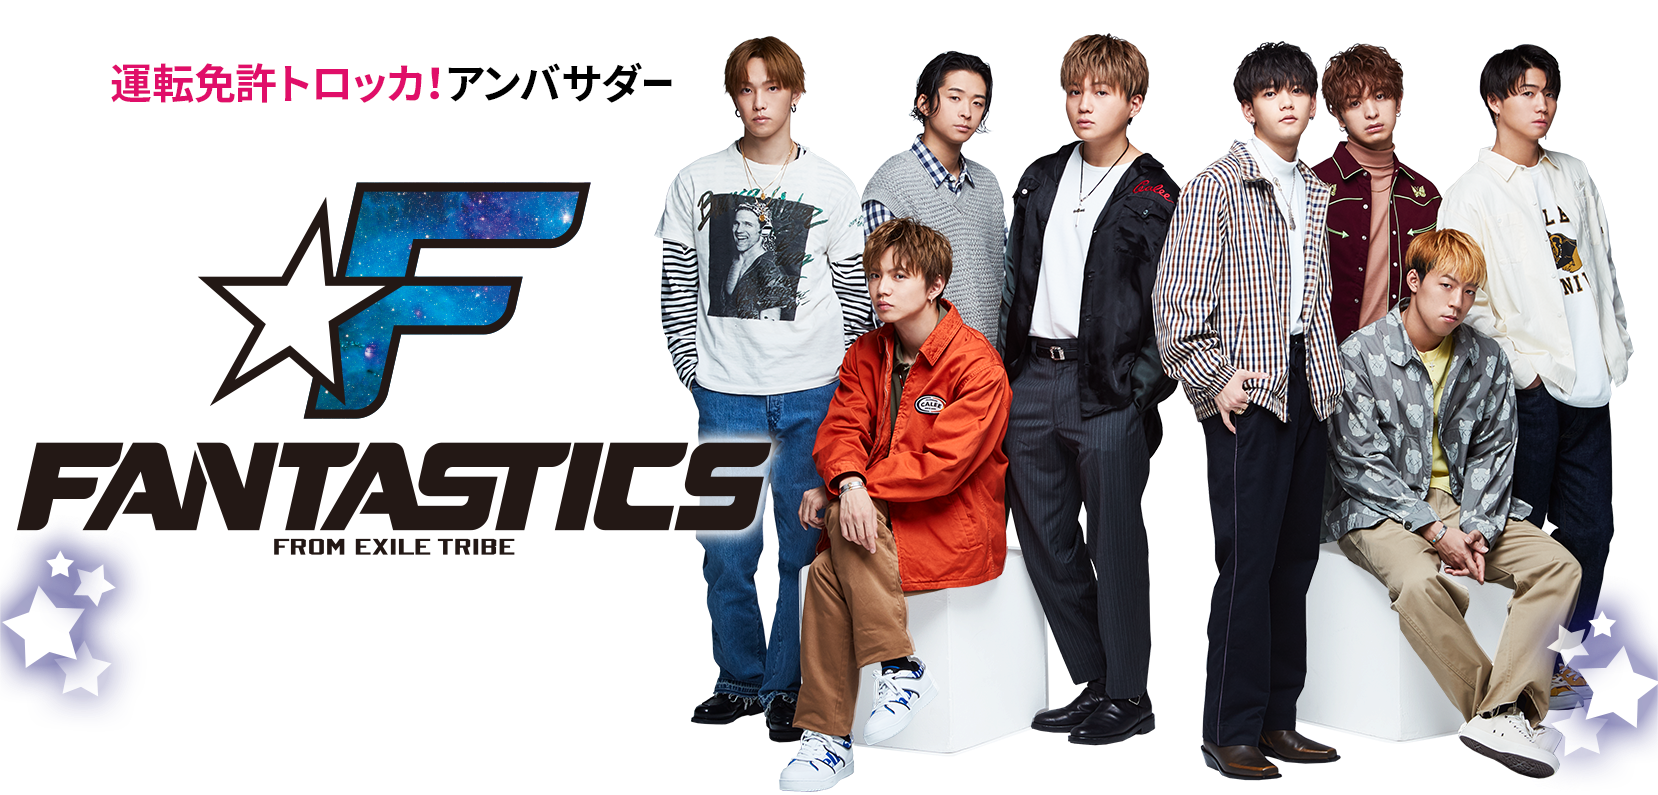 Fantastics From Exile Tribe 合宿免許なら運転免許トロッカ